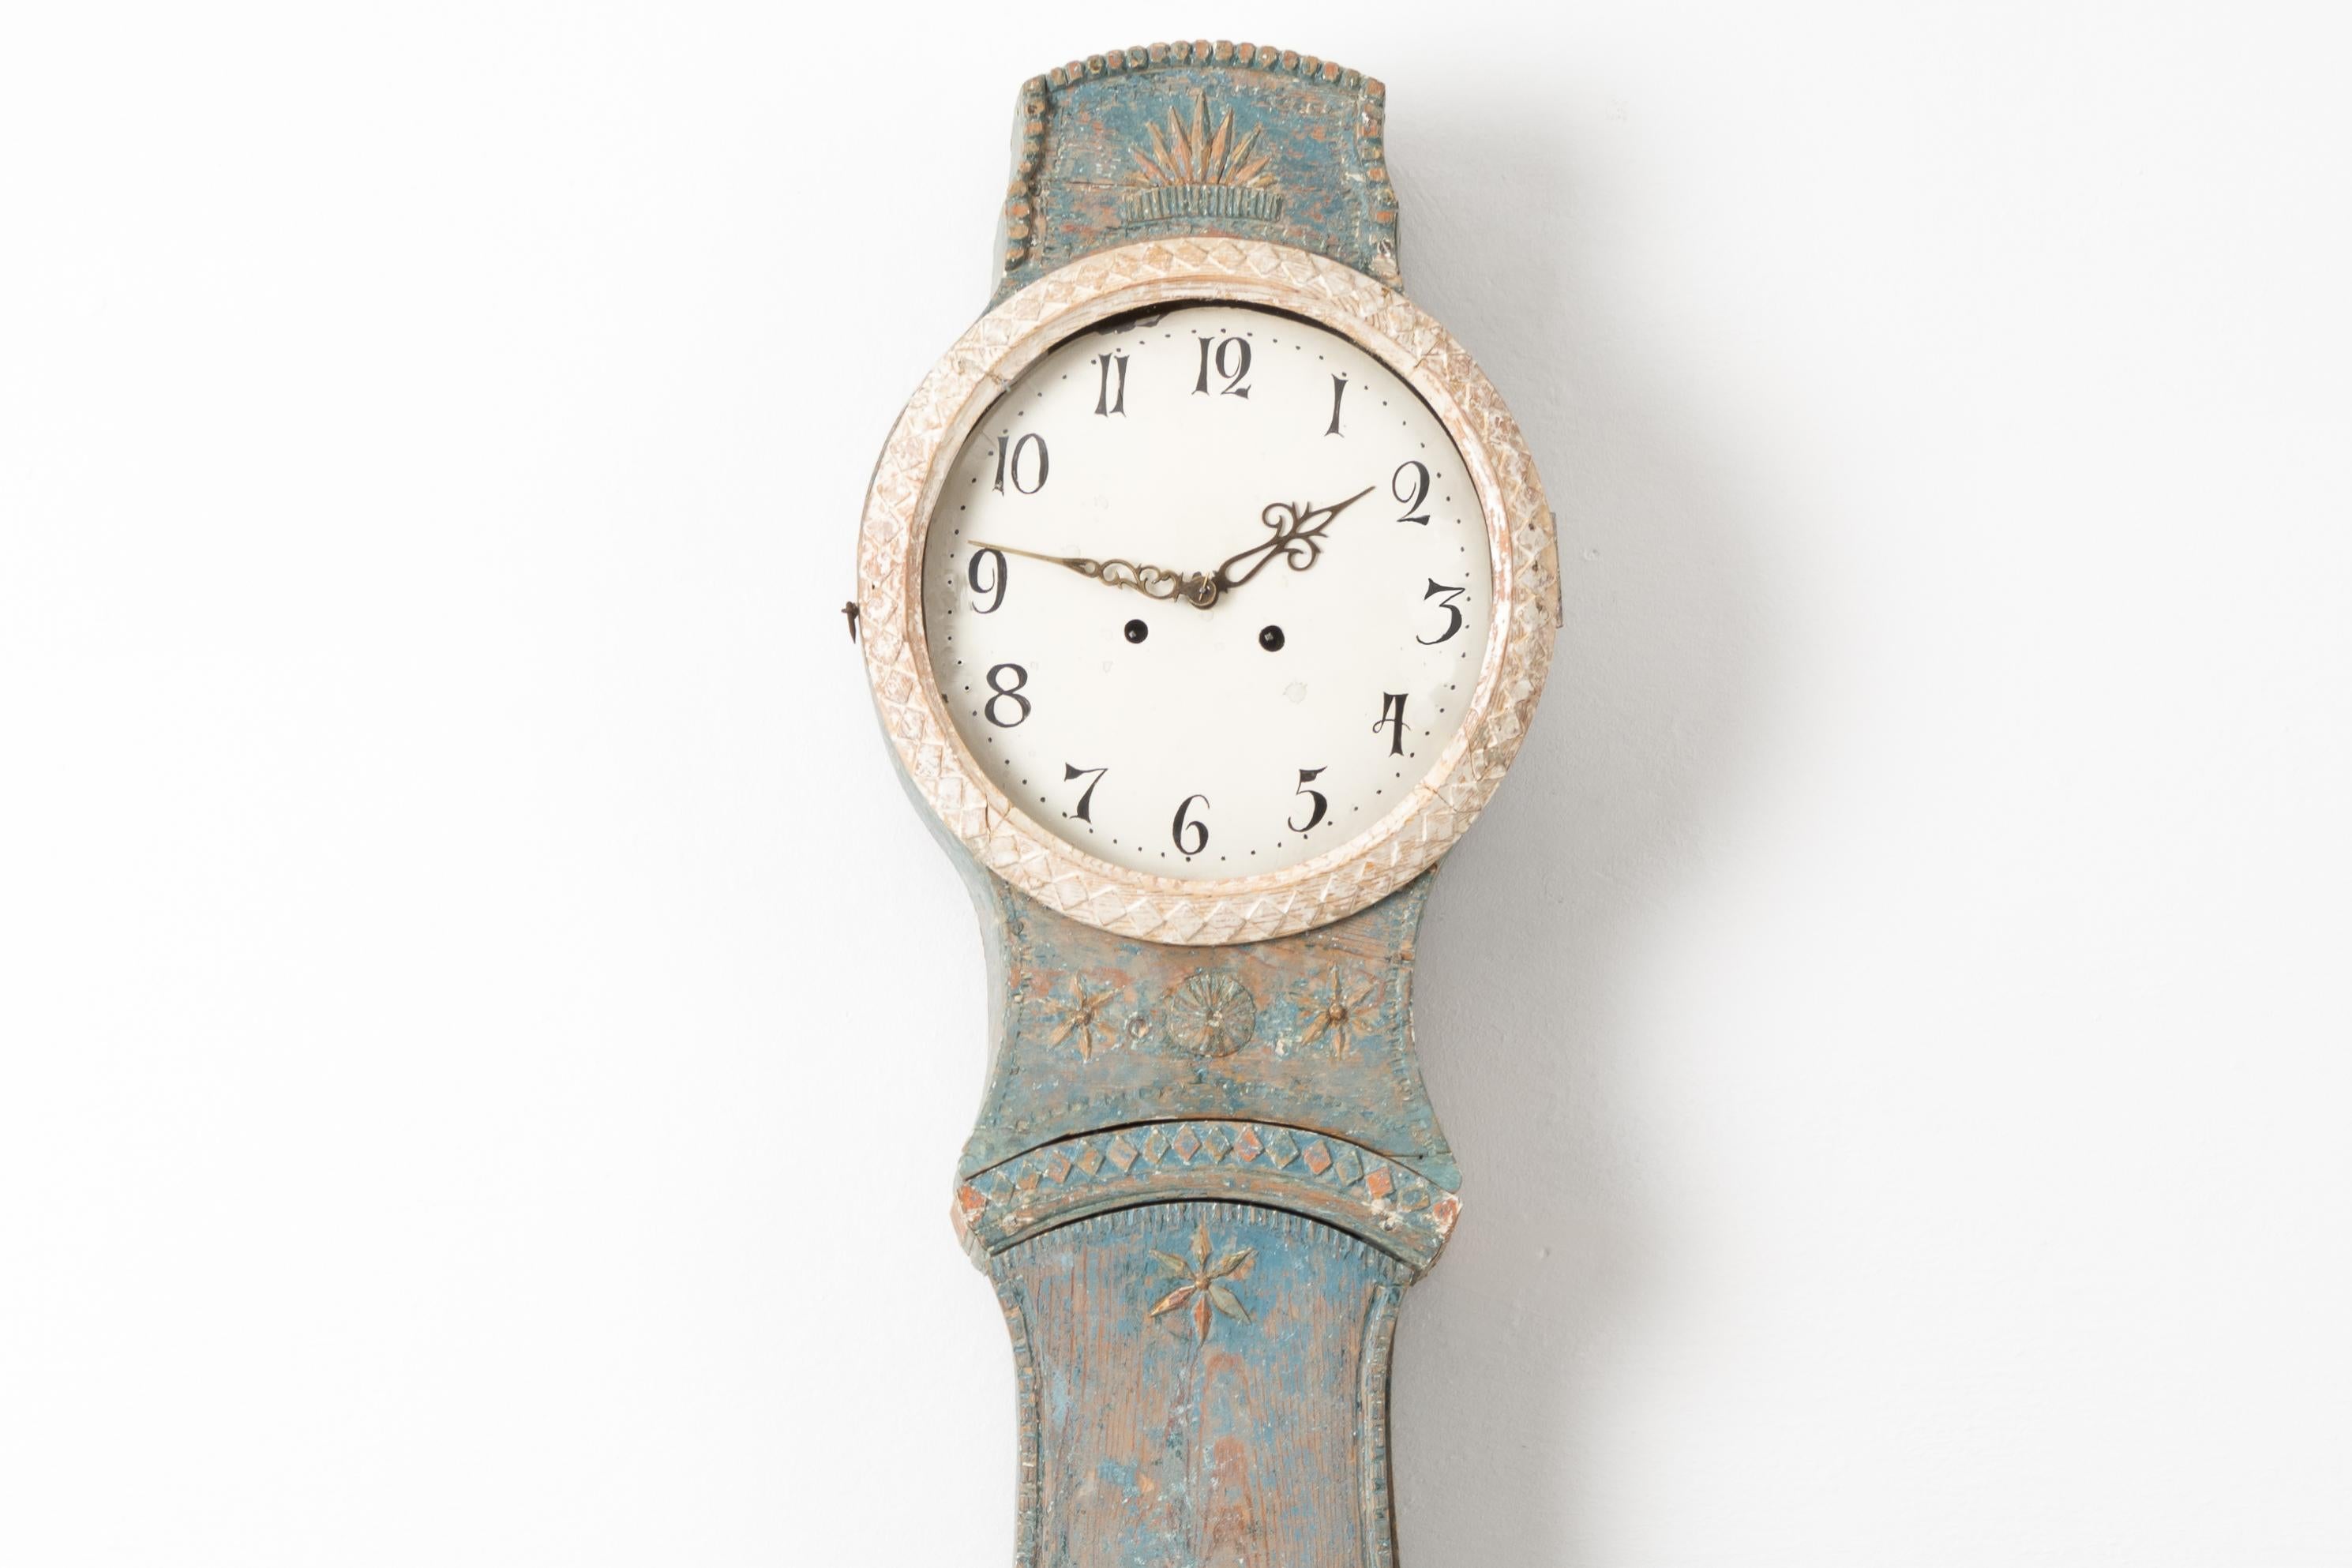 Country mora clock in Rococo style from northern Sweden. The clock is made in painted pine and from the first half of the 19th century, around 1820 to 1830. The blue paint is original from the early 1800s. Decorated with wooden details carved by